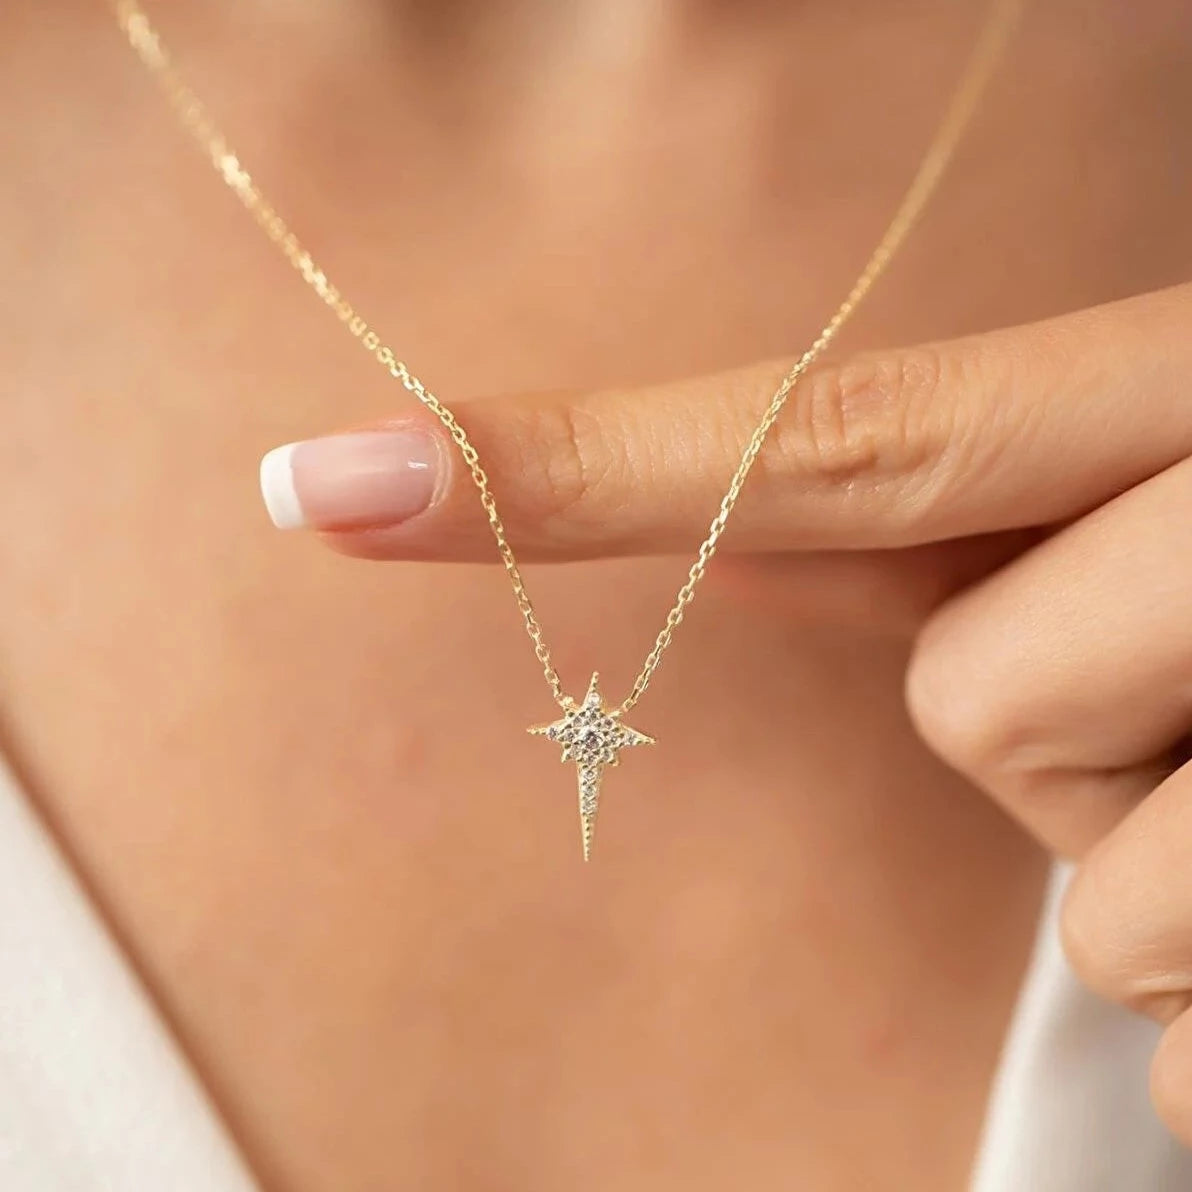 Northern Star Polaris Sterling Silver Necklace - Spero London